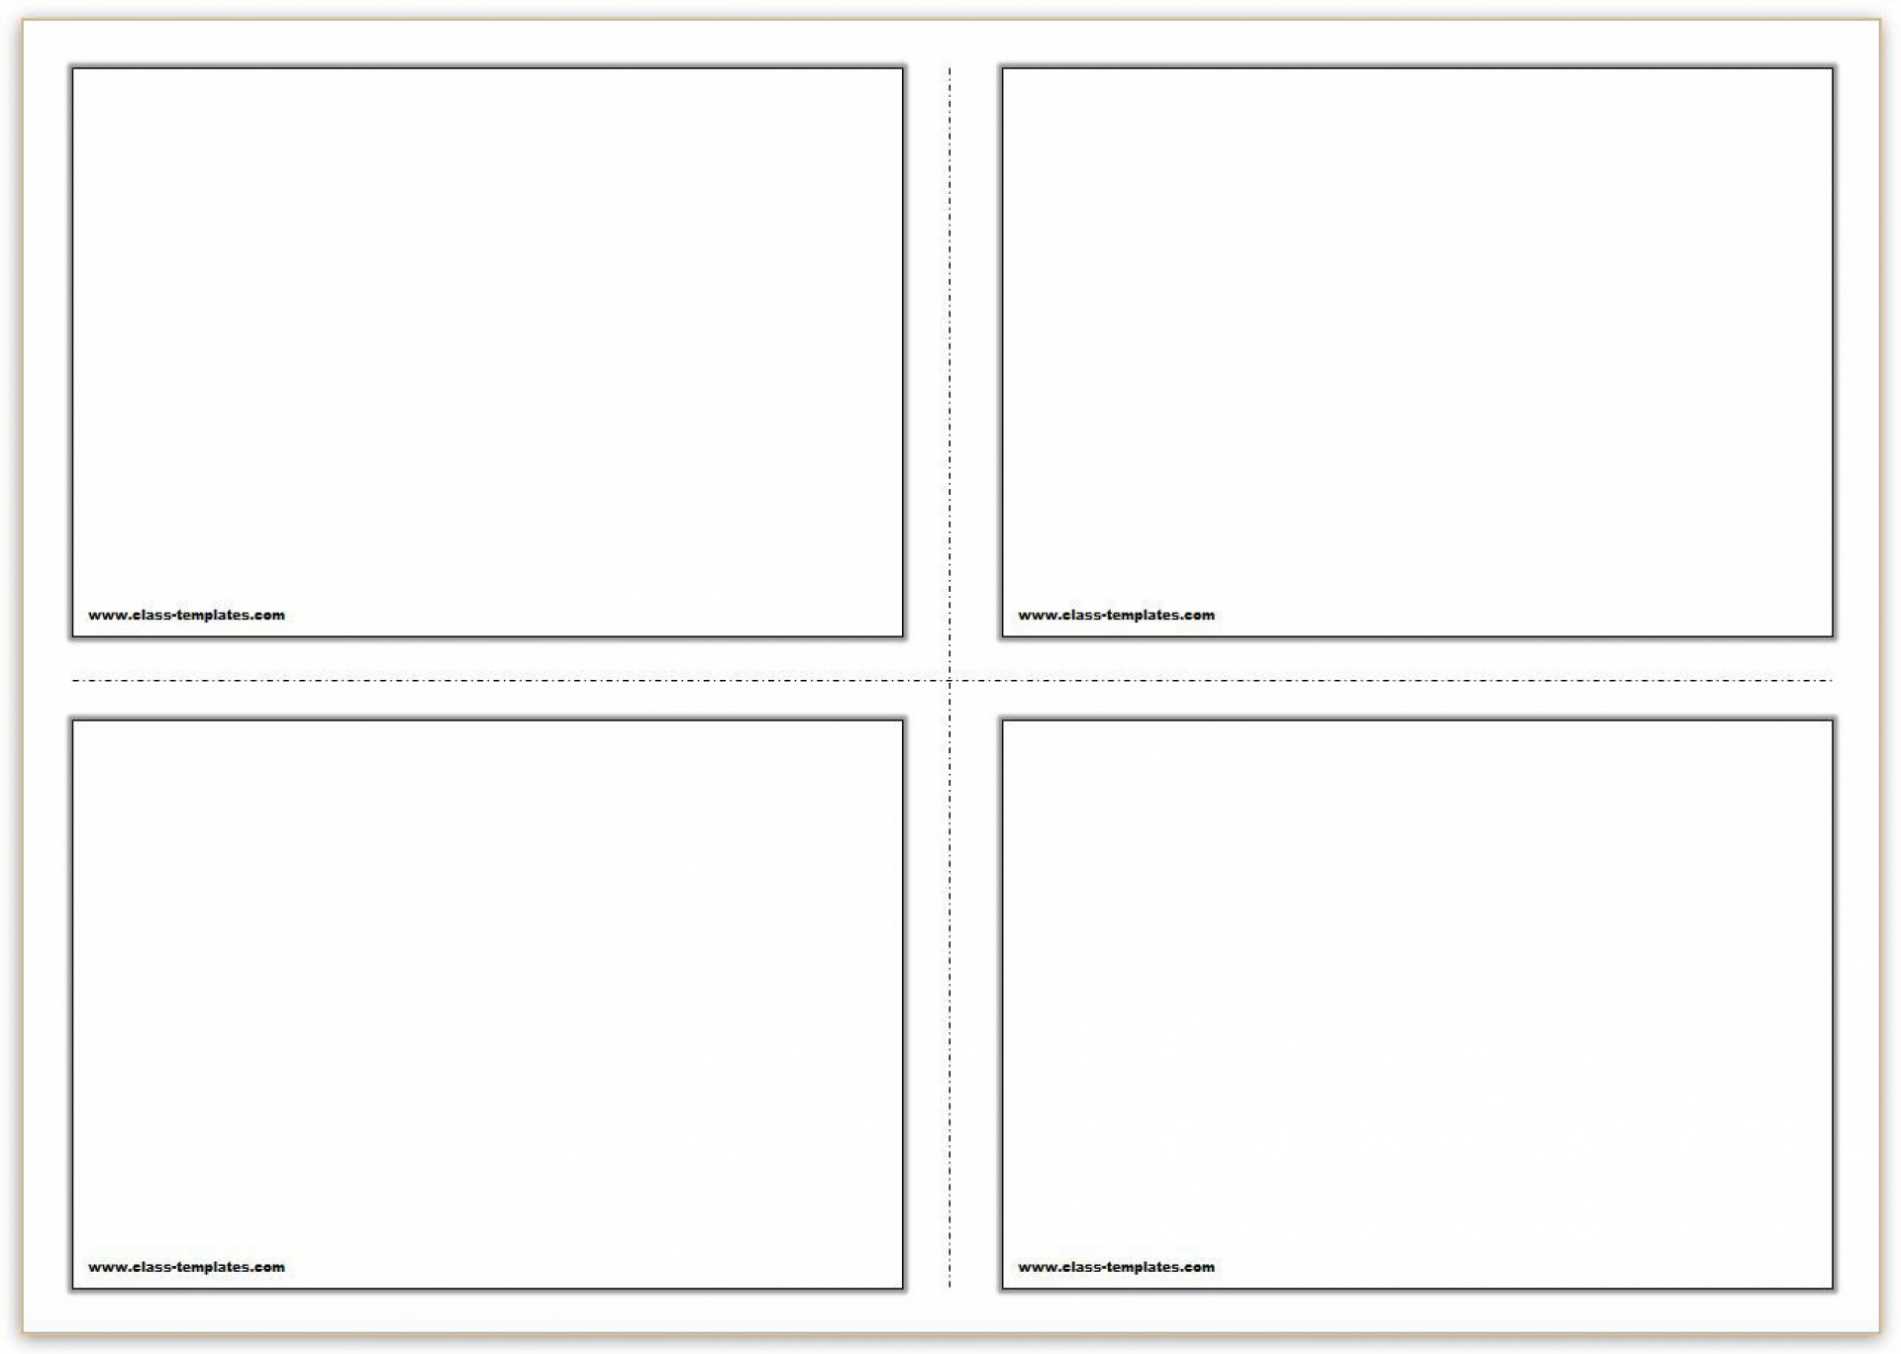 Index Card Template Word ~ Addictionary with regard to 3 X 5 Index Card Template